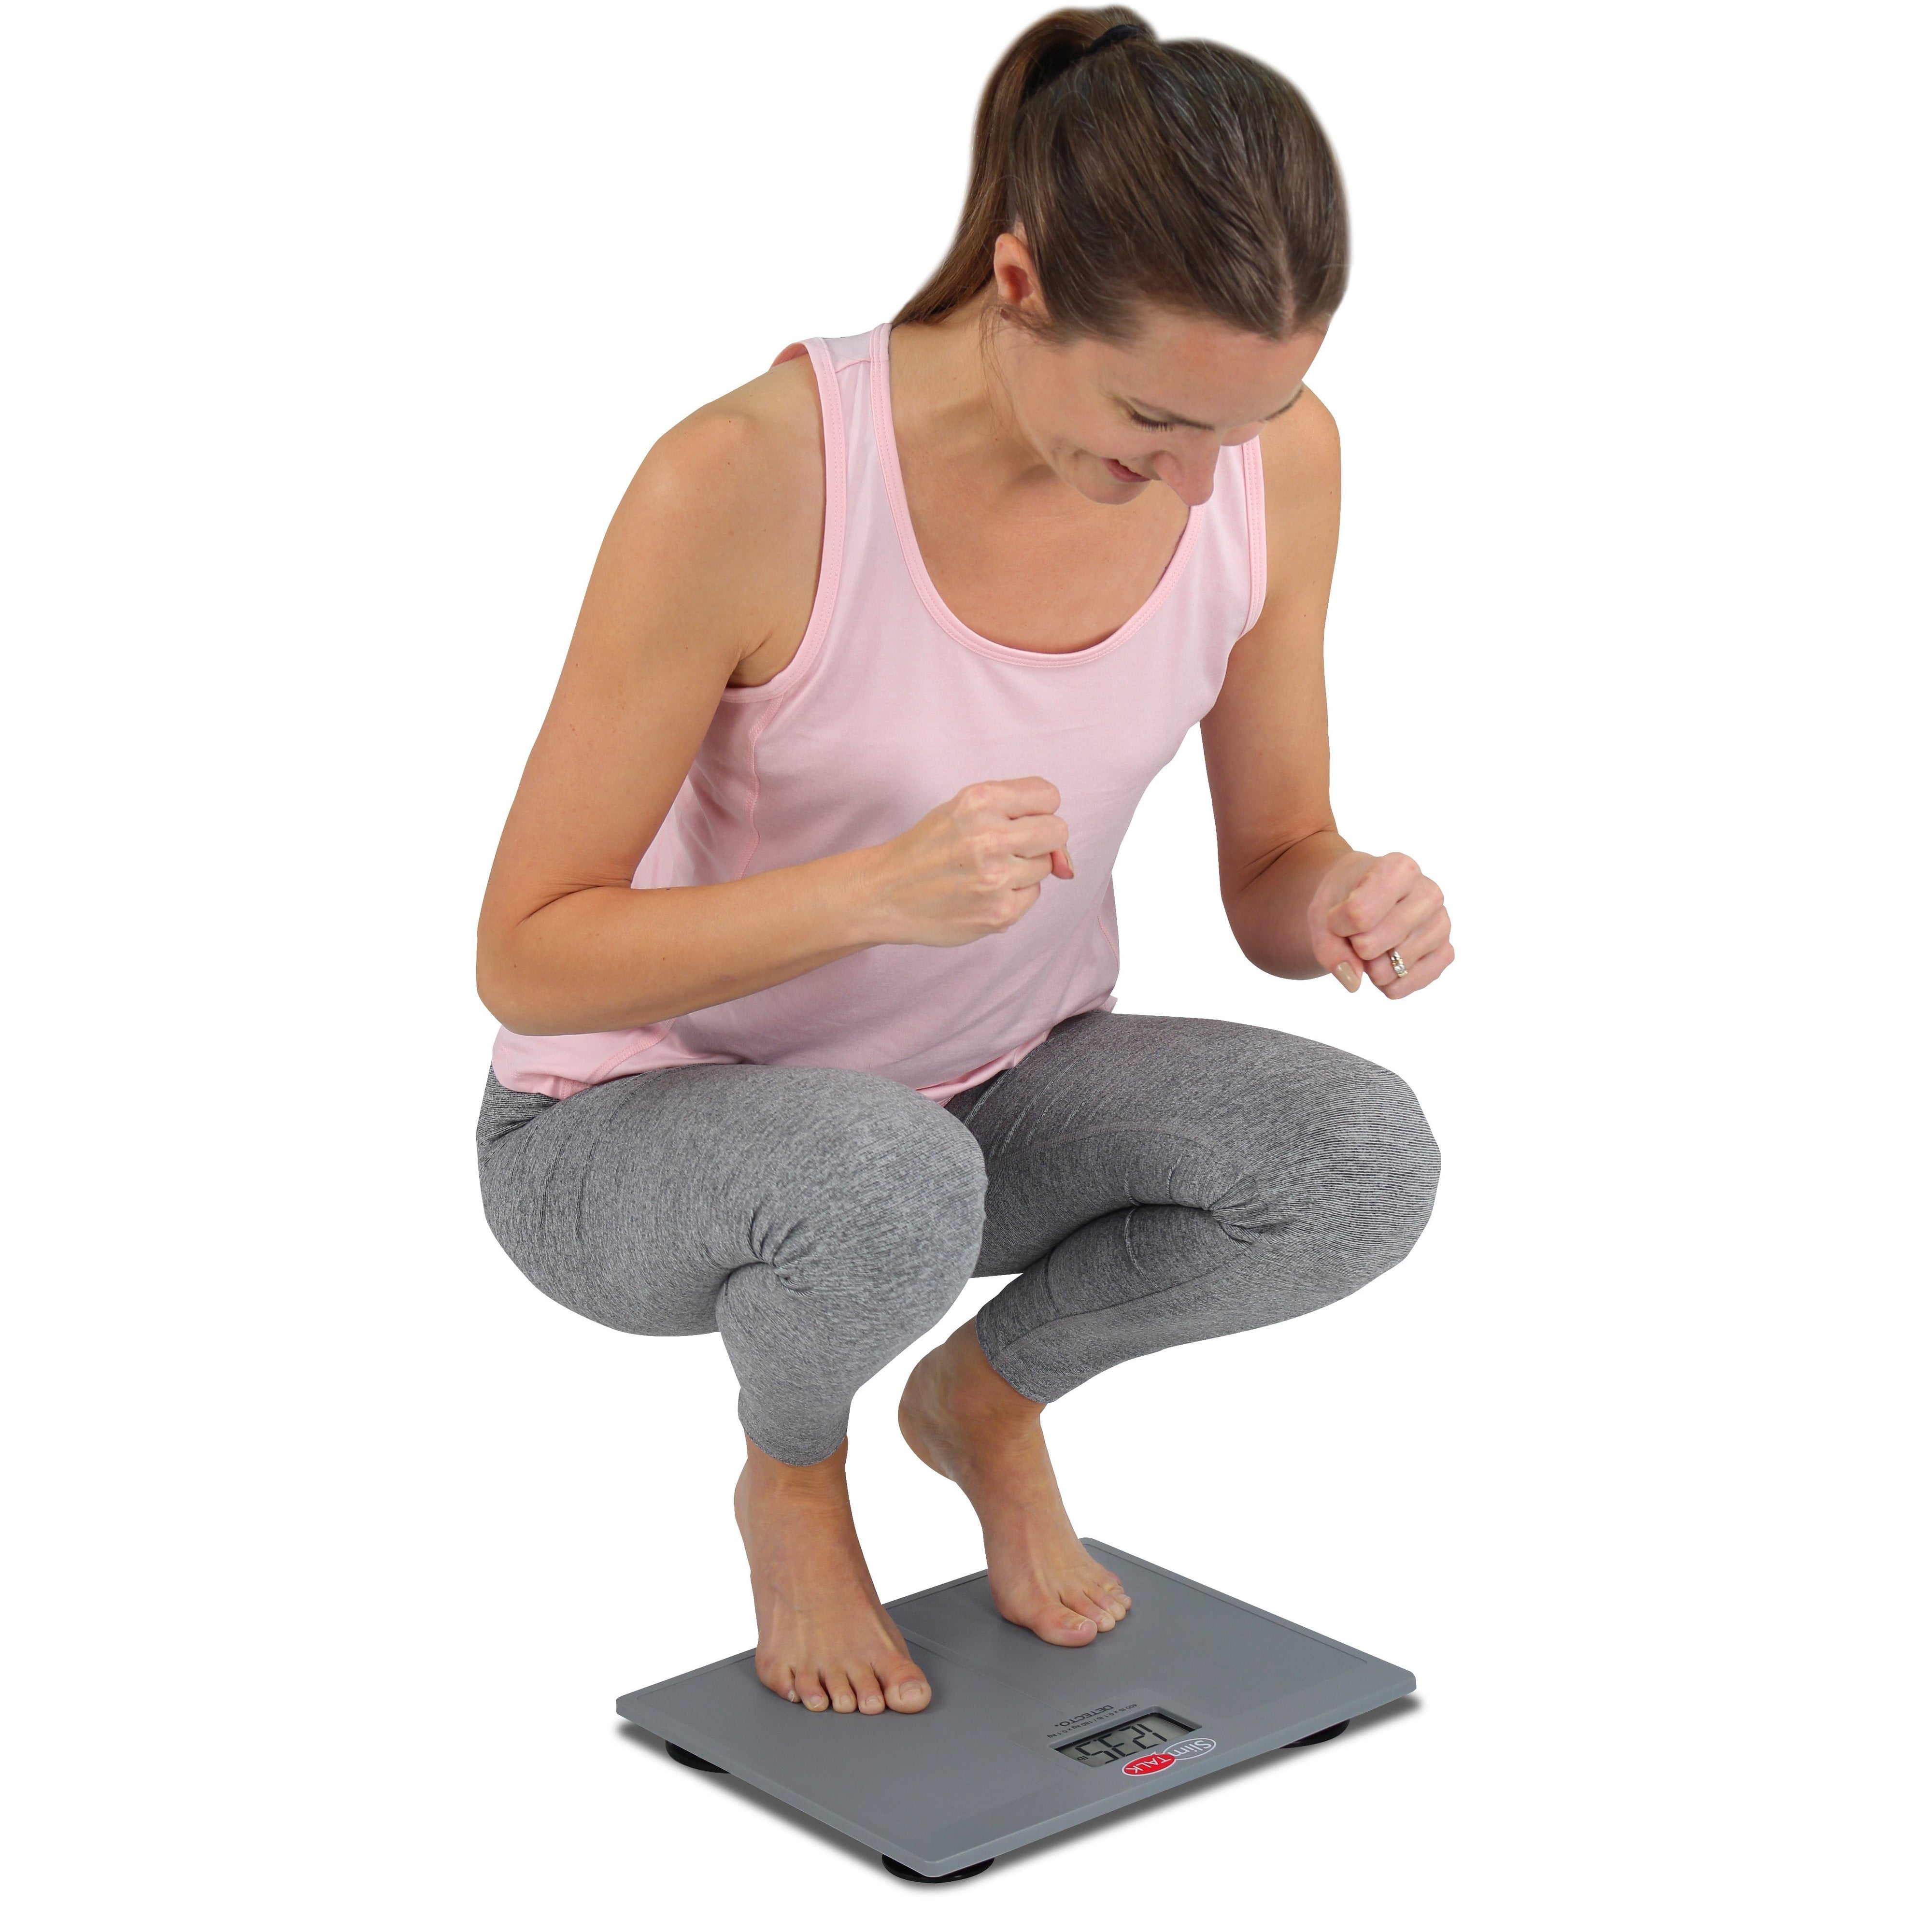 Why the SlimTALK Scale Will Change the Way You Weigh 